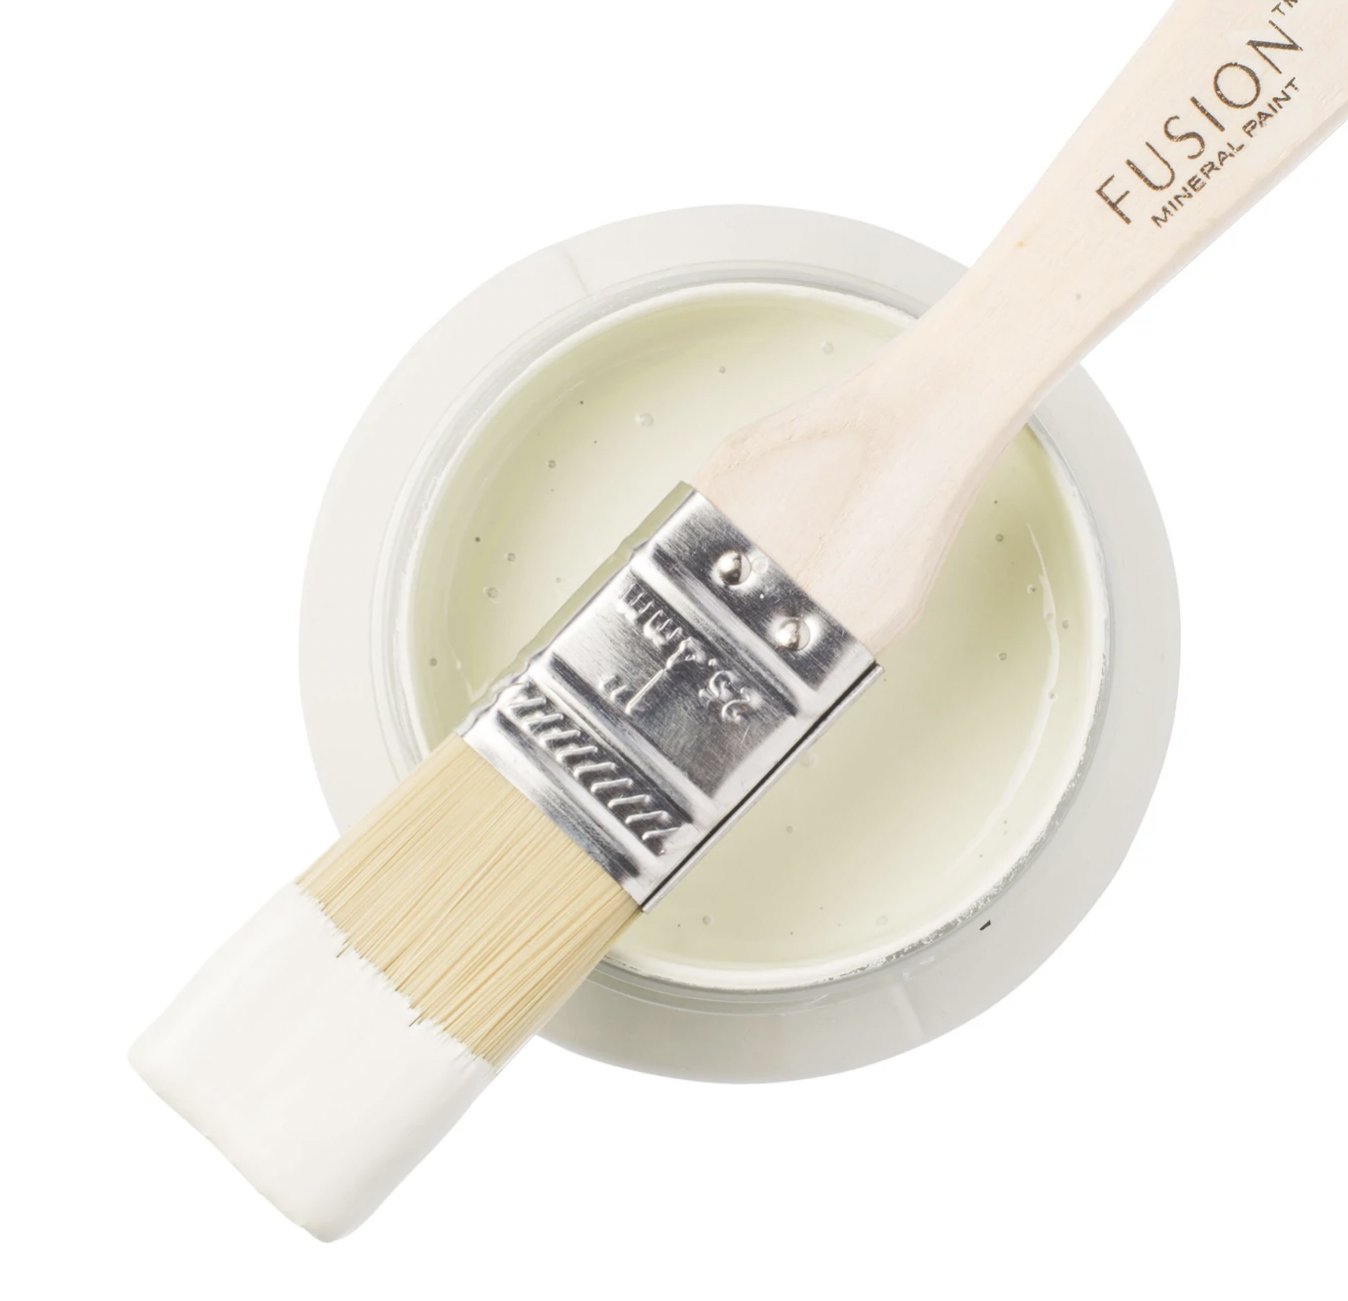 Mint green paint can and brush from Fusion Mineral Paint